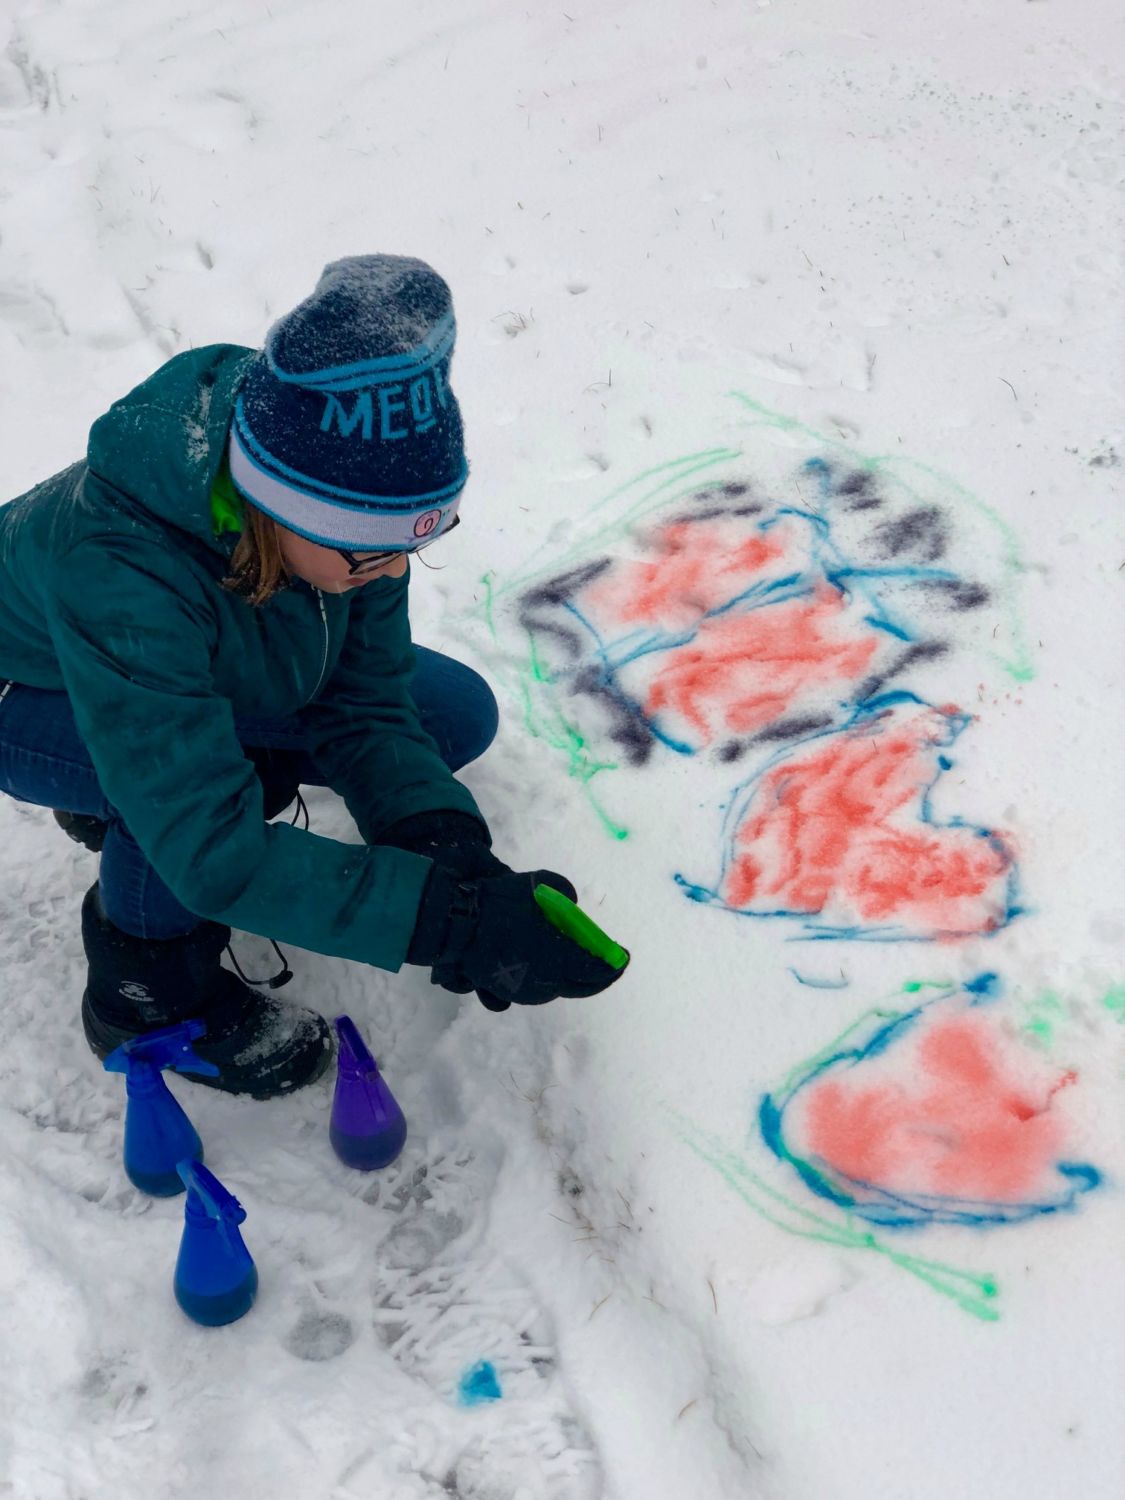 Let Creativity Shine on Snow Days with Snow Painting - The Toy Insider